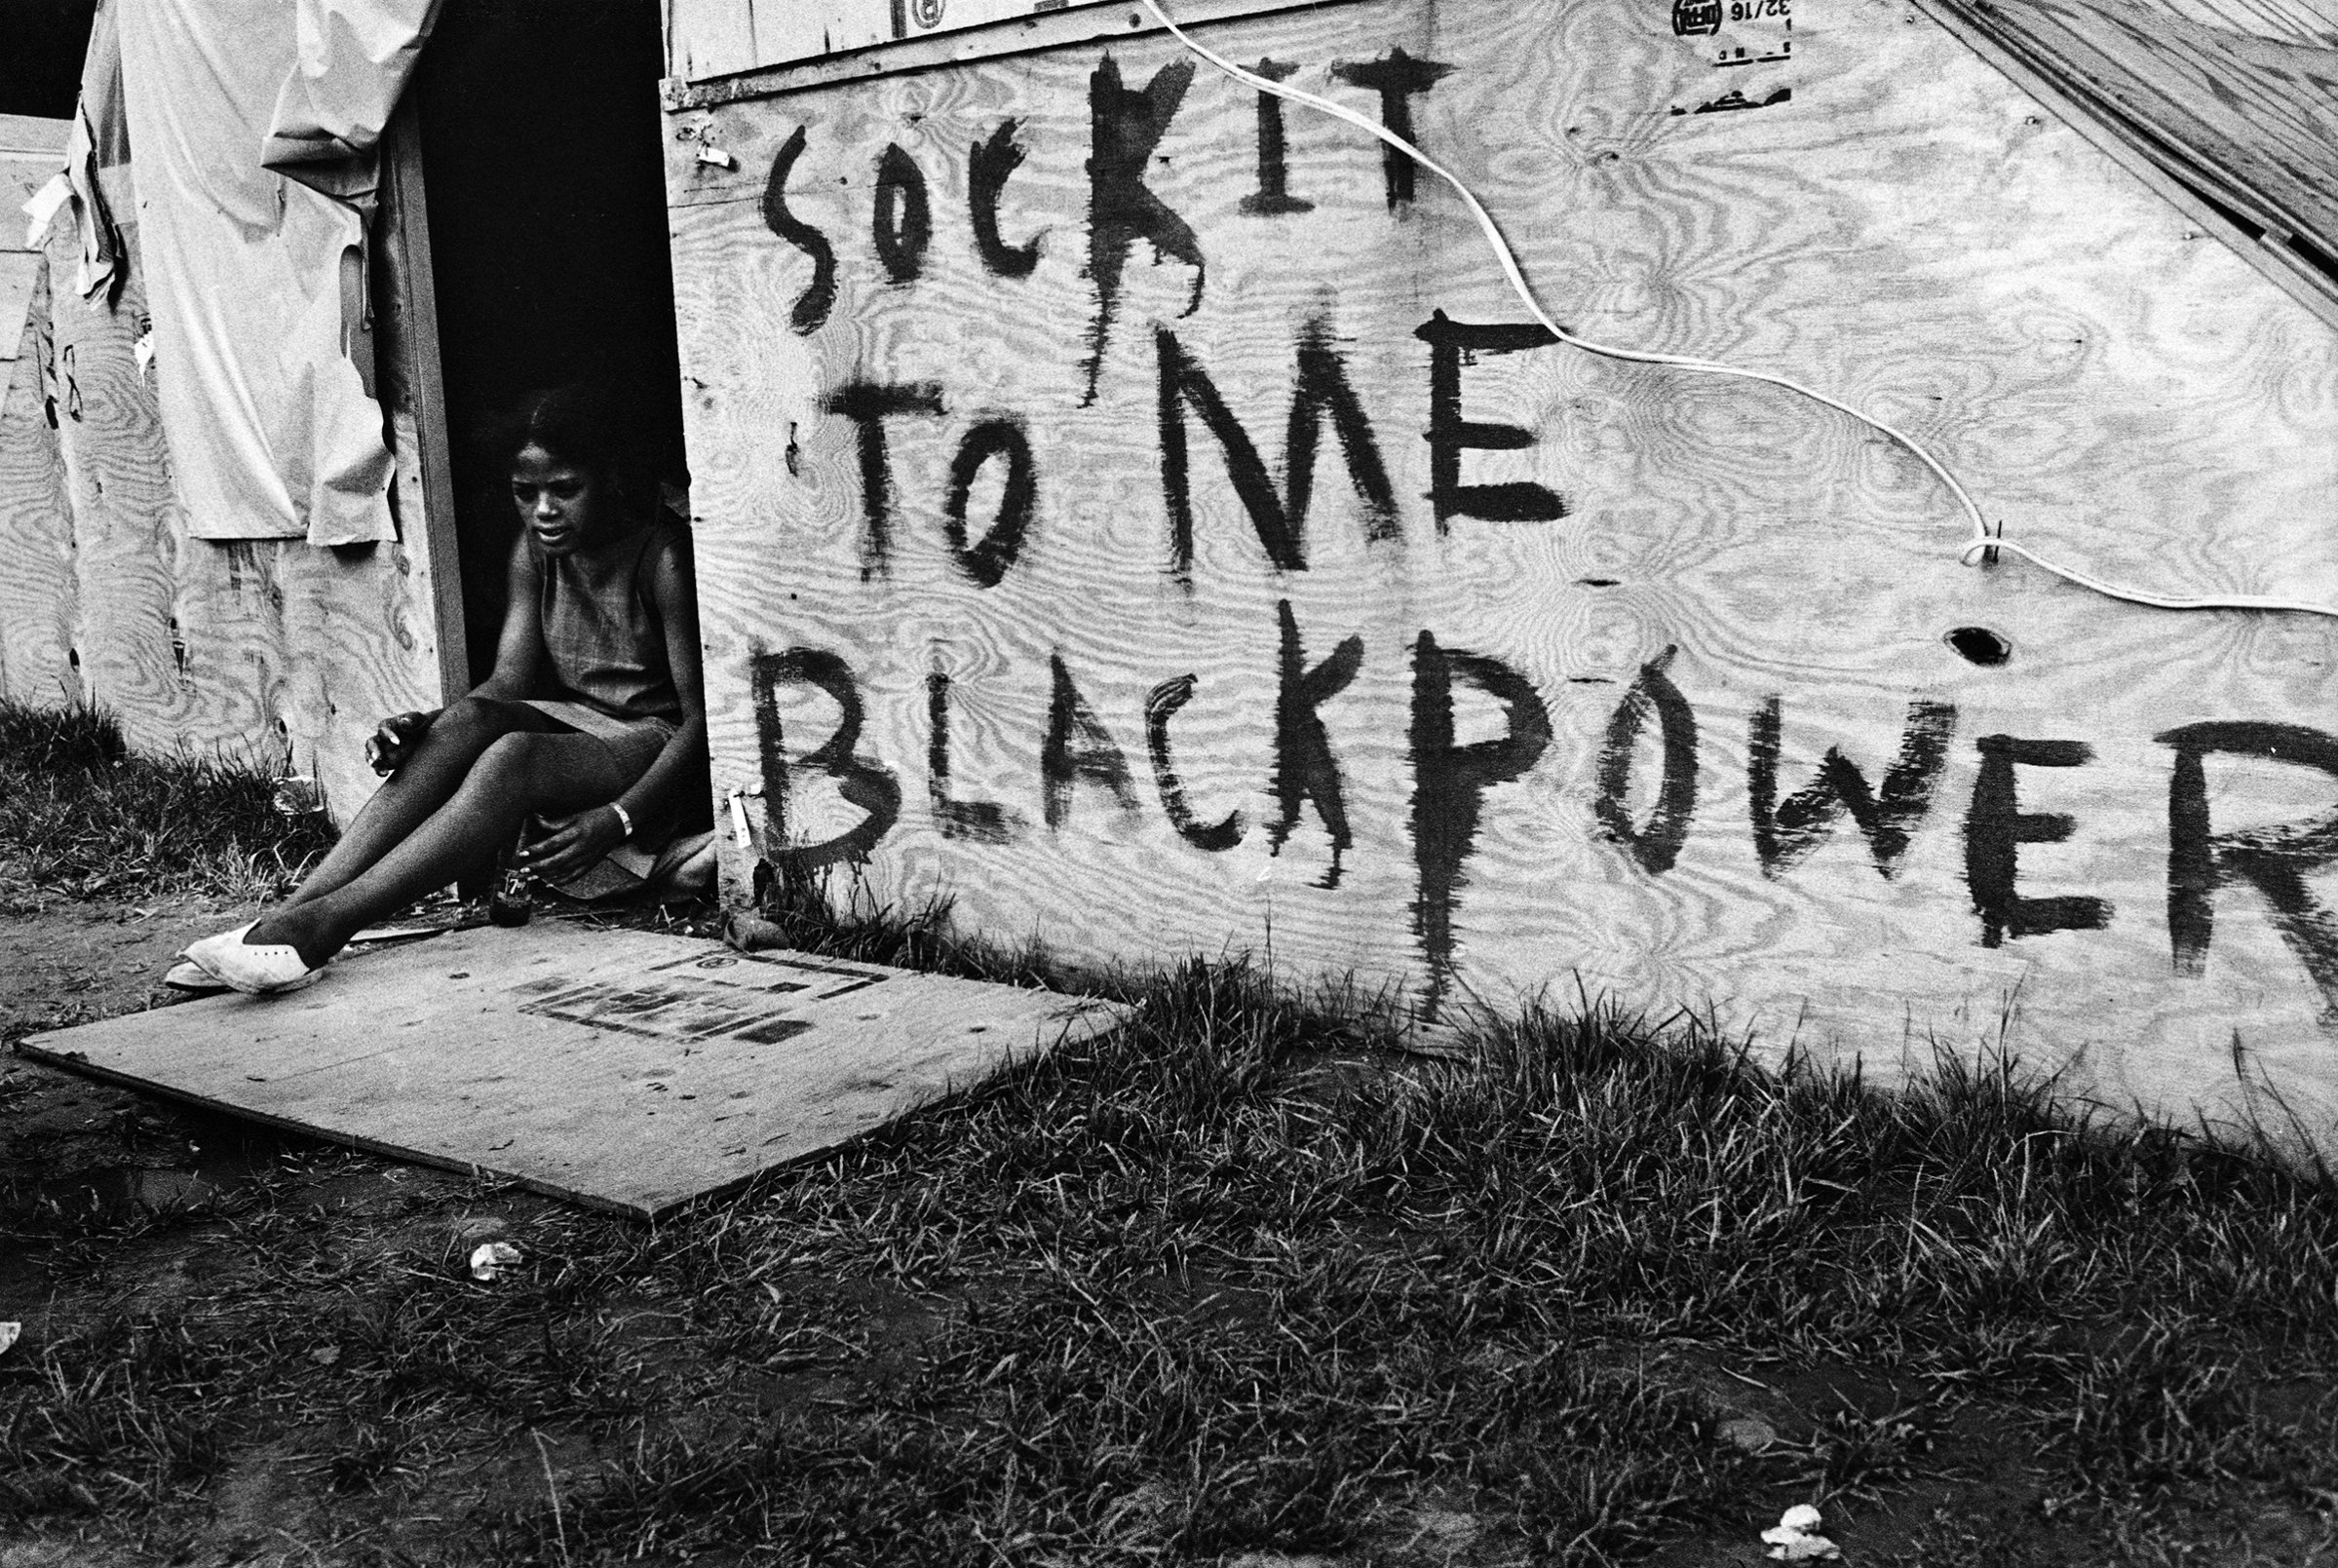 Ressurection City, Poor Peoples Campaign, 1968 by Jill Freedman.